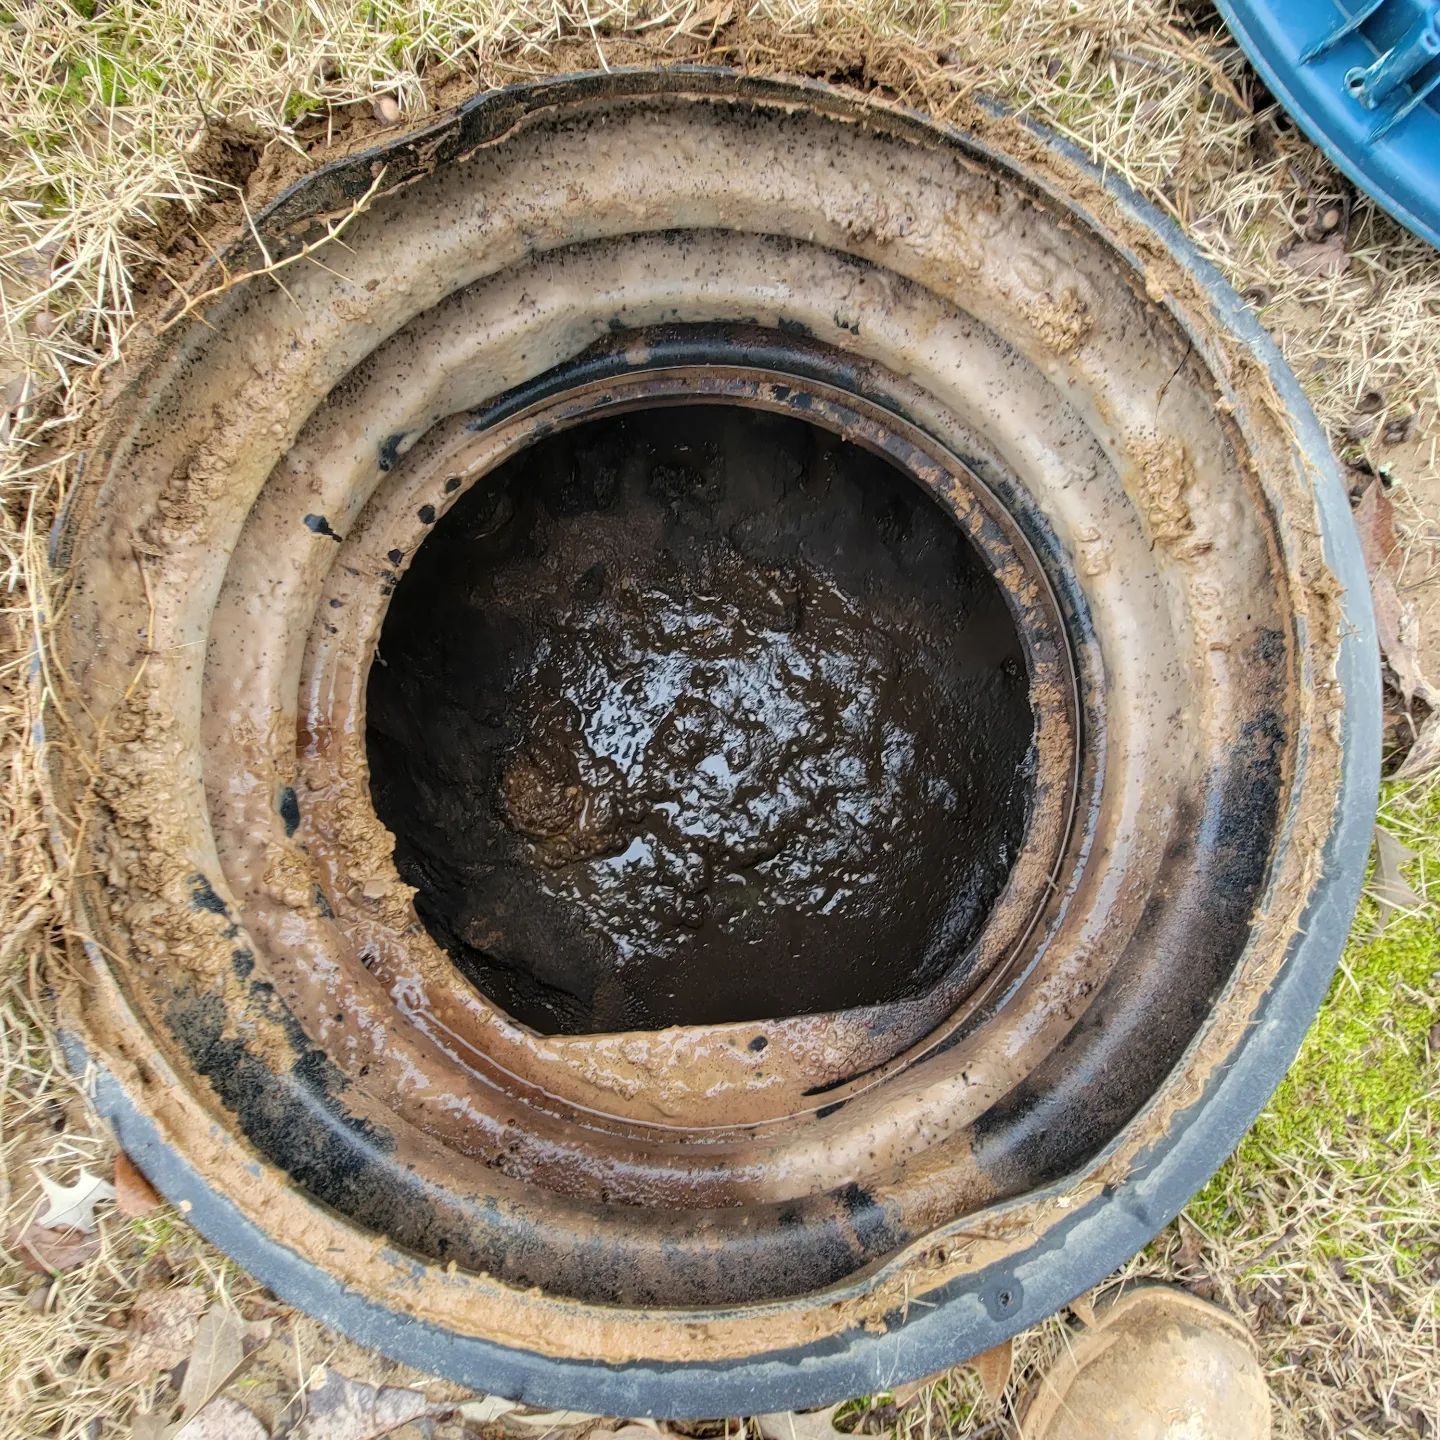 Efficient septic solutions
